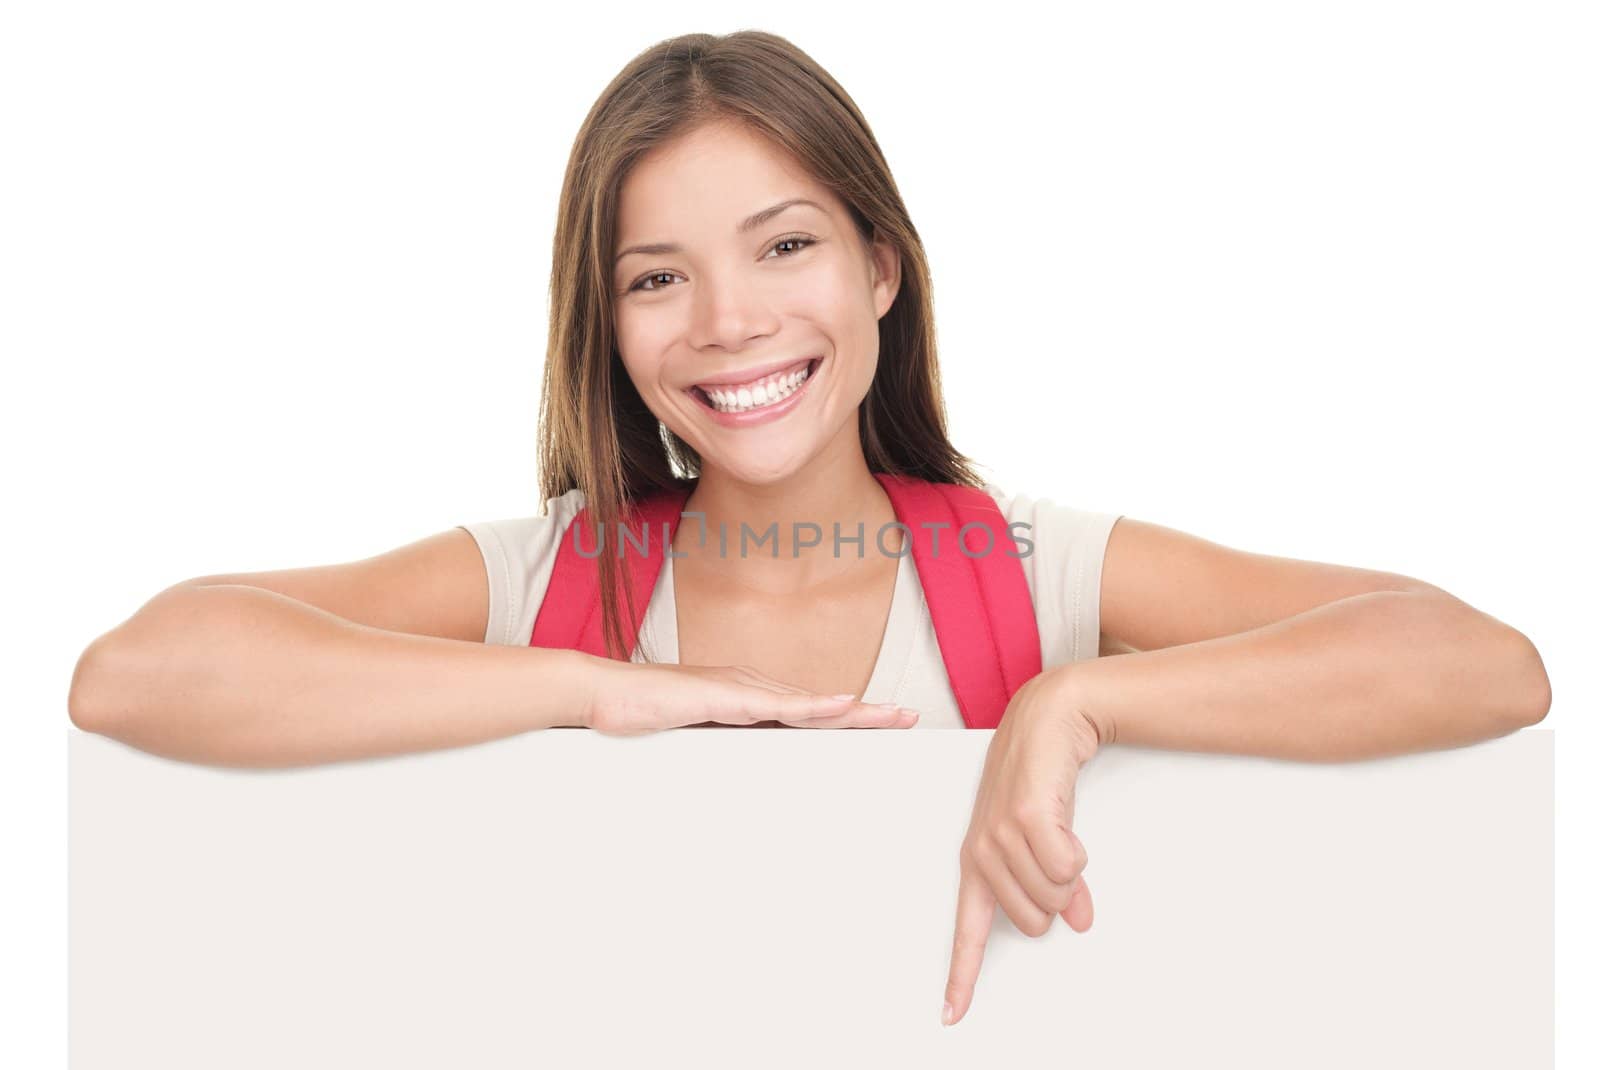 Female university / college student standing above blank empty billboard sign isolated on white background. Young Asian / Caucasian woman student.